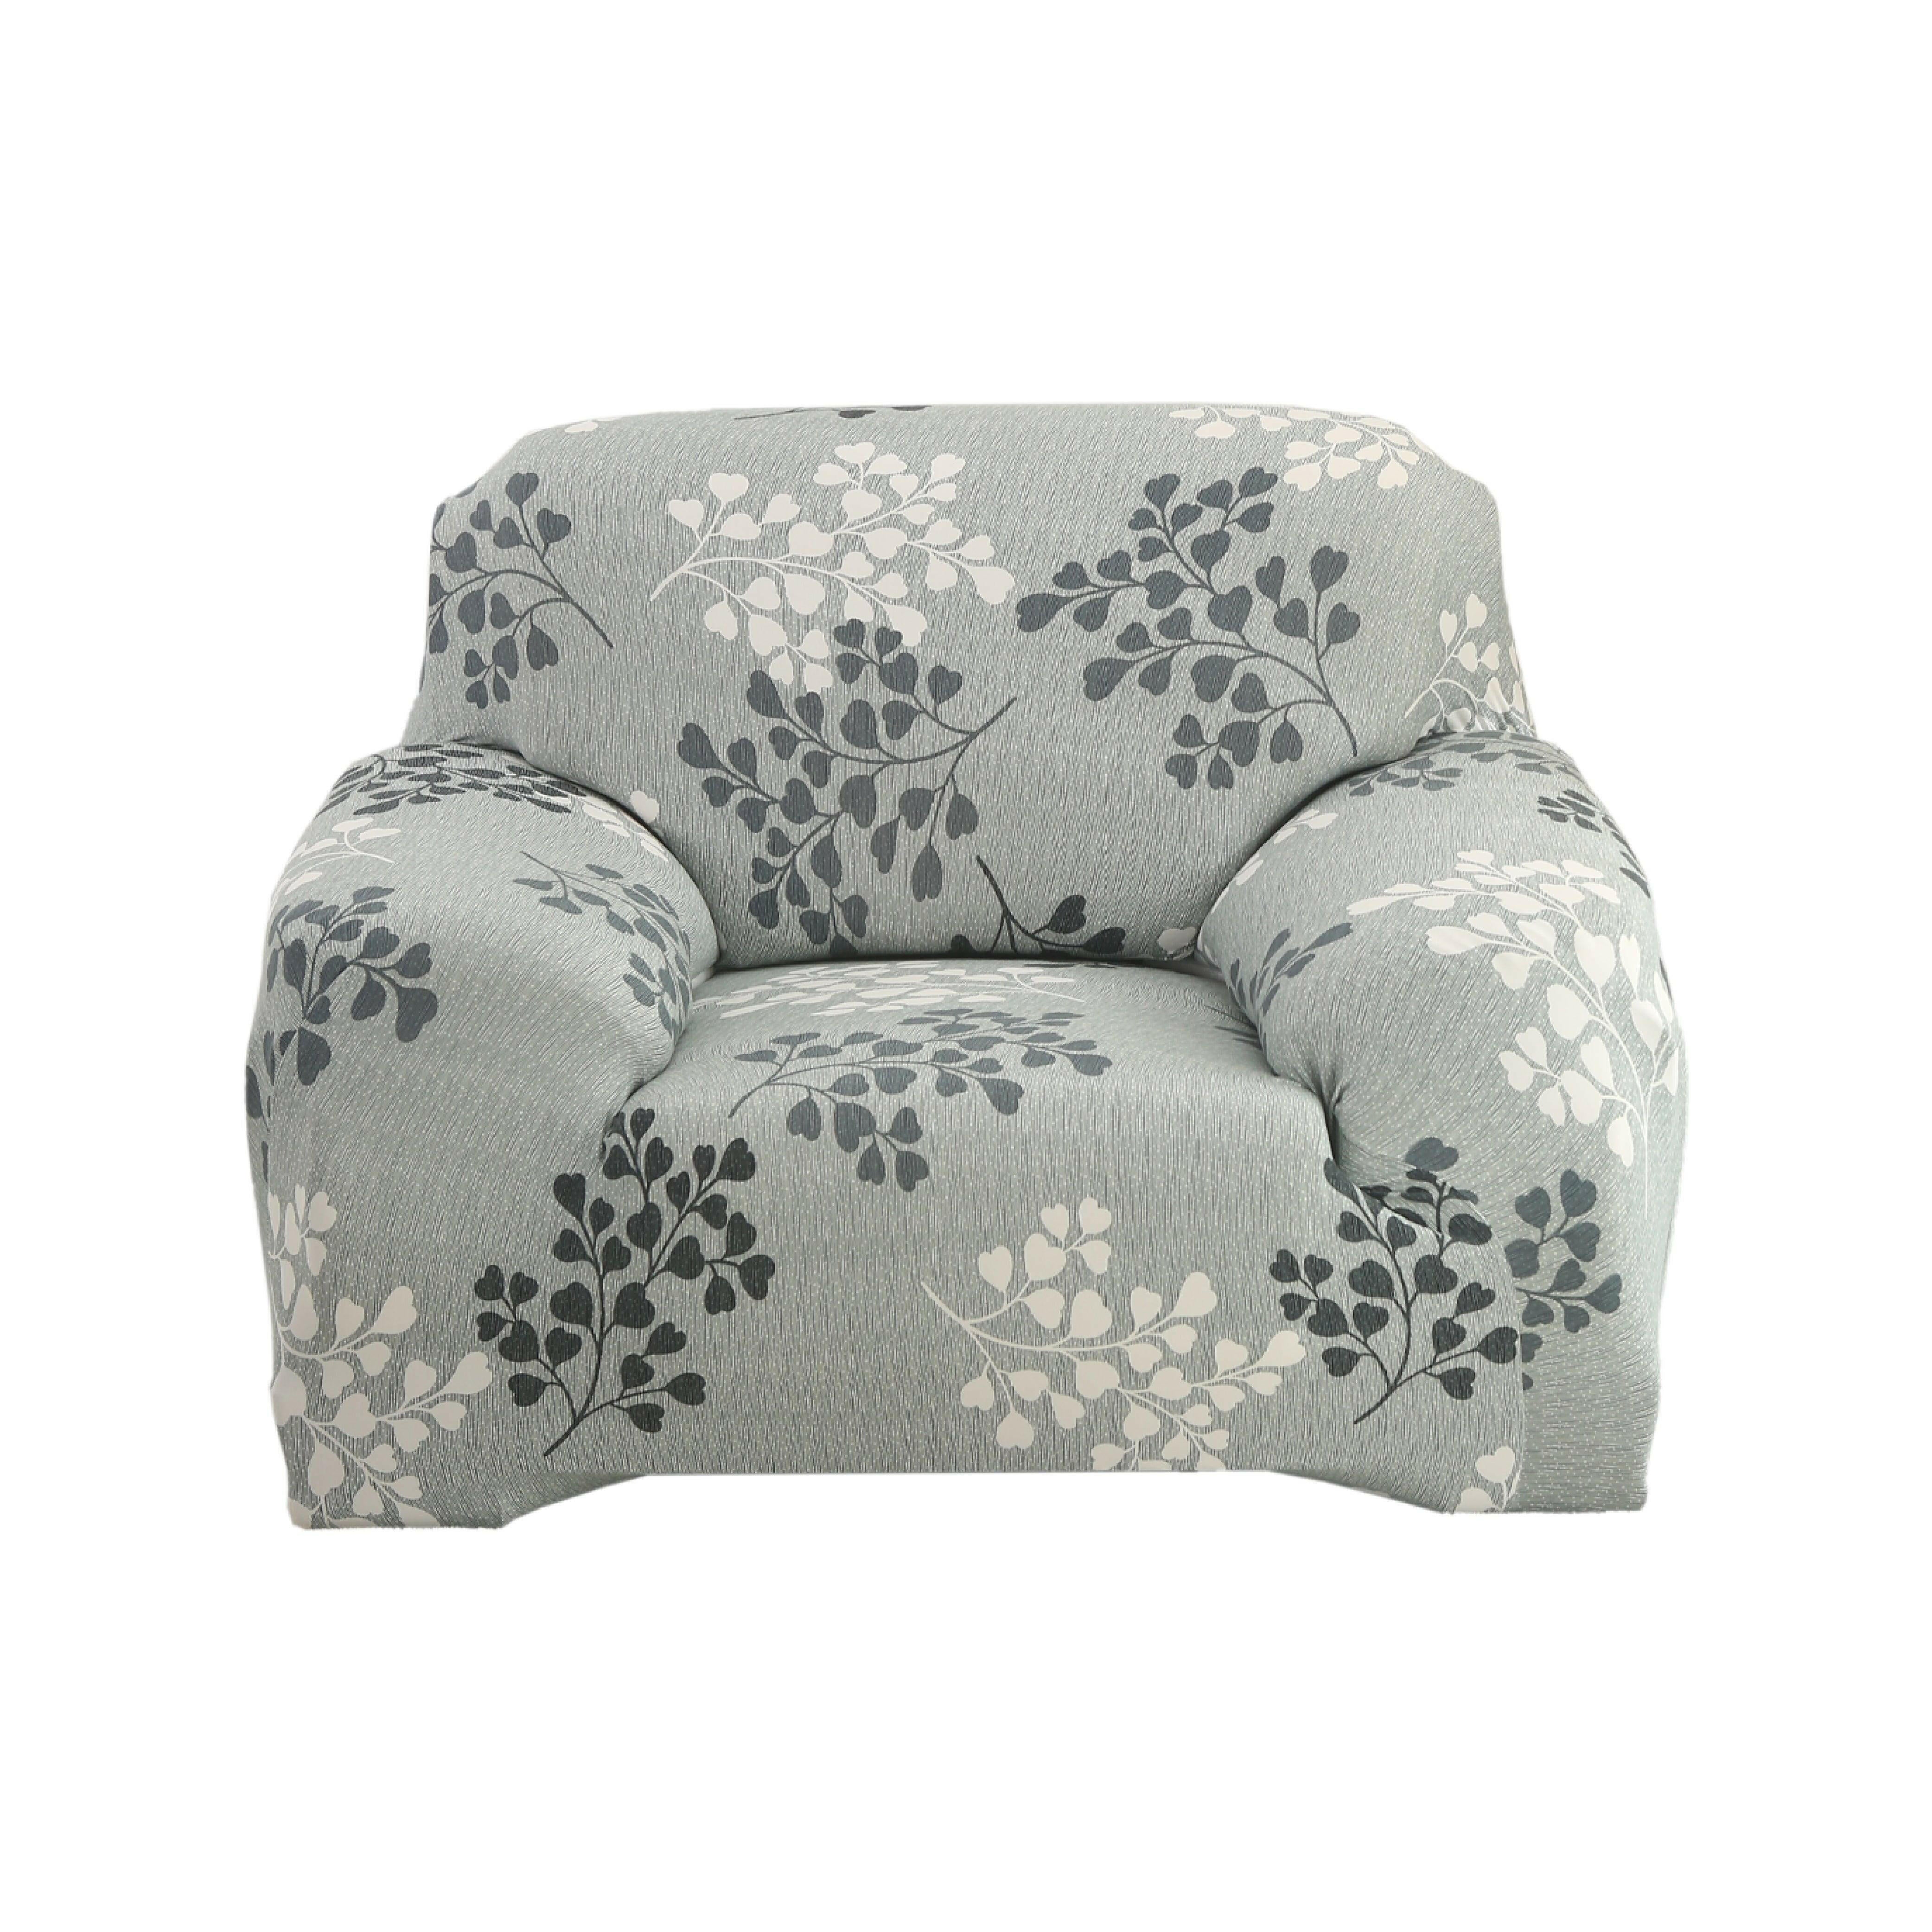 Hyper Cover Stretch Sofa Cover with Patterns Autumn Leaves | Sofa Covers | Brilliant Home Living